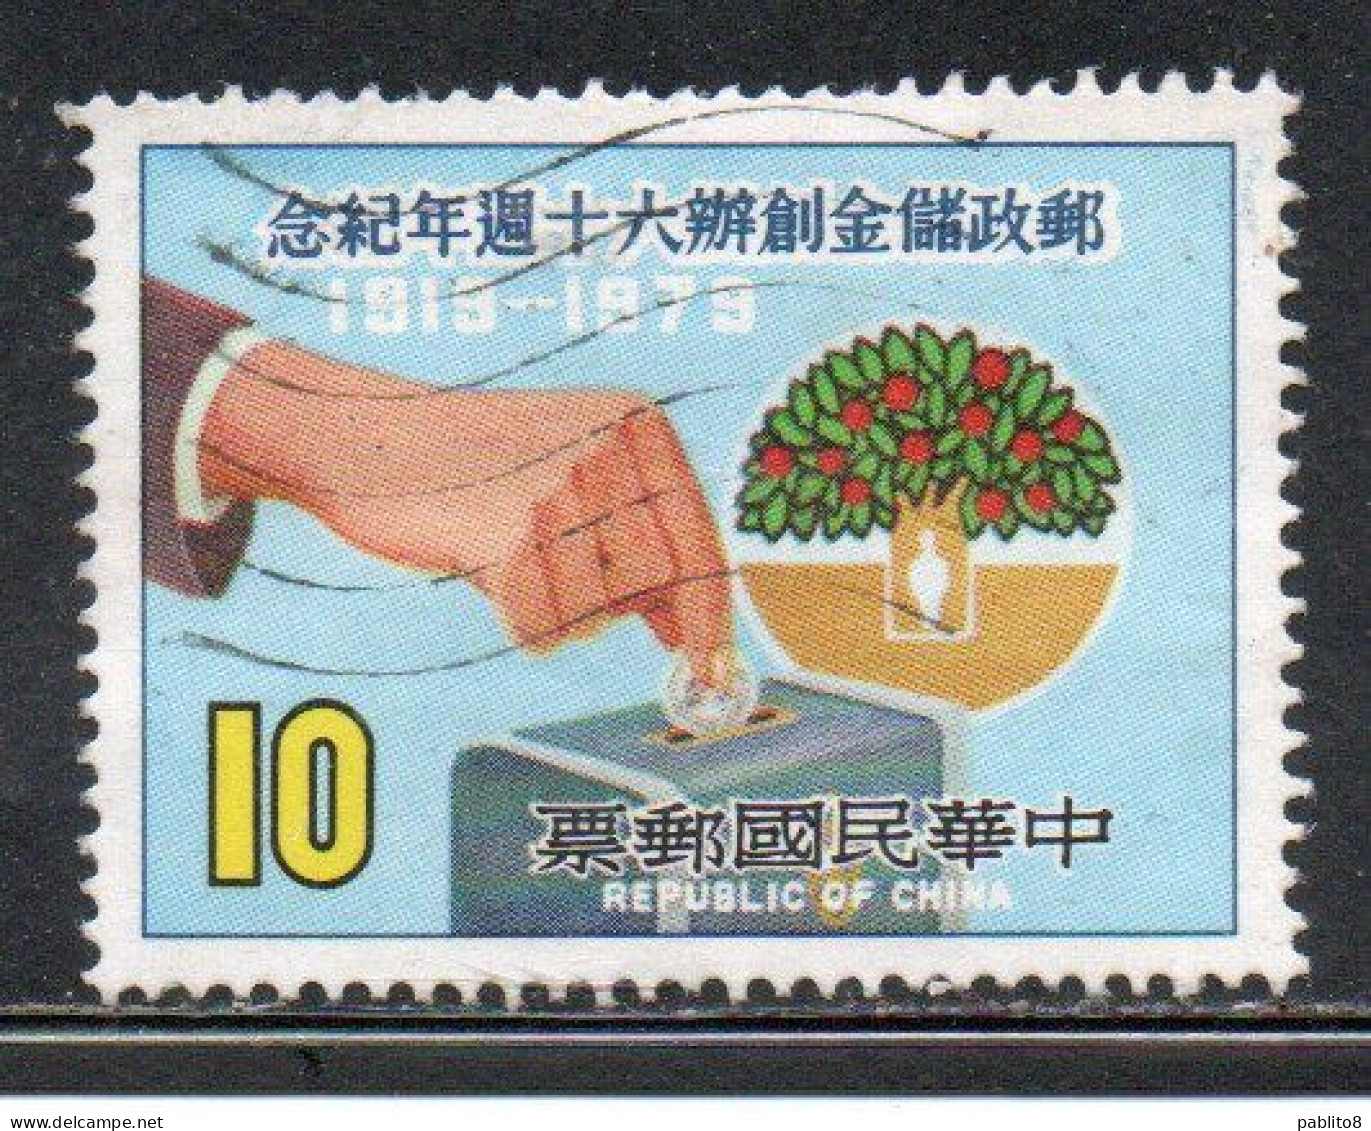 CHINA REPUBLIC CINA TAIWAN FORMOSA 1979 POSTAL SAVINGS HAND PUTTING COIN IN BANK 10$ USED USATO OBLITERE' - Gebraucht